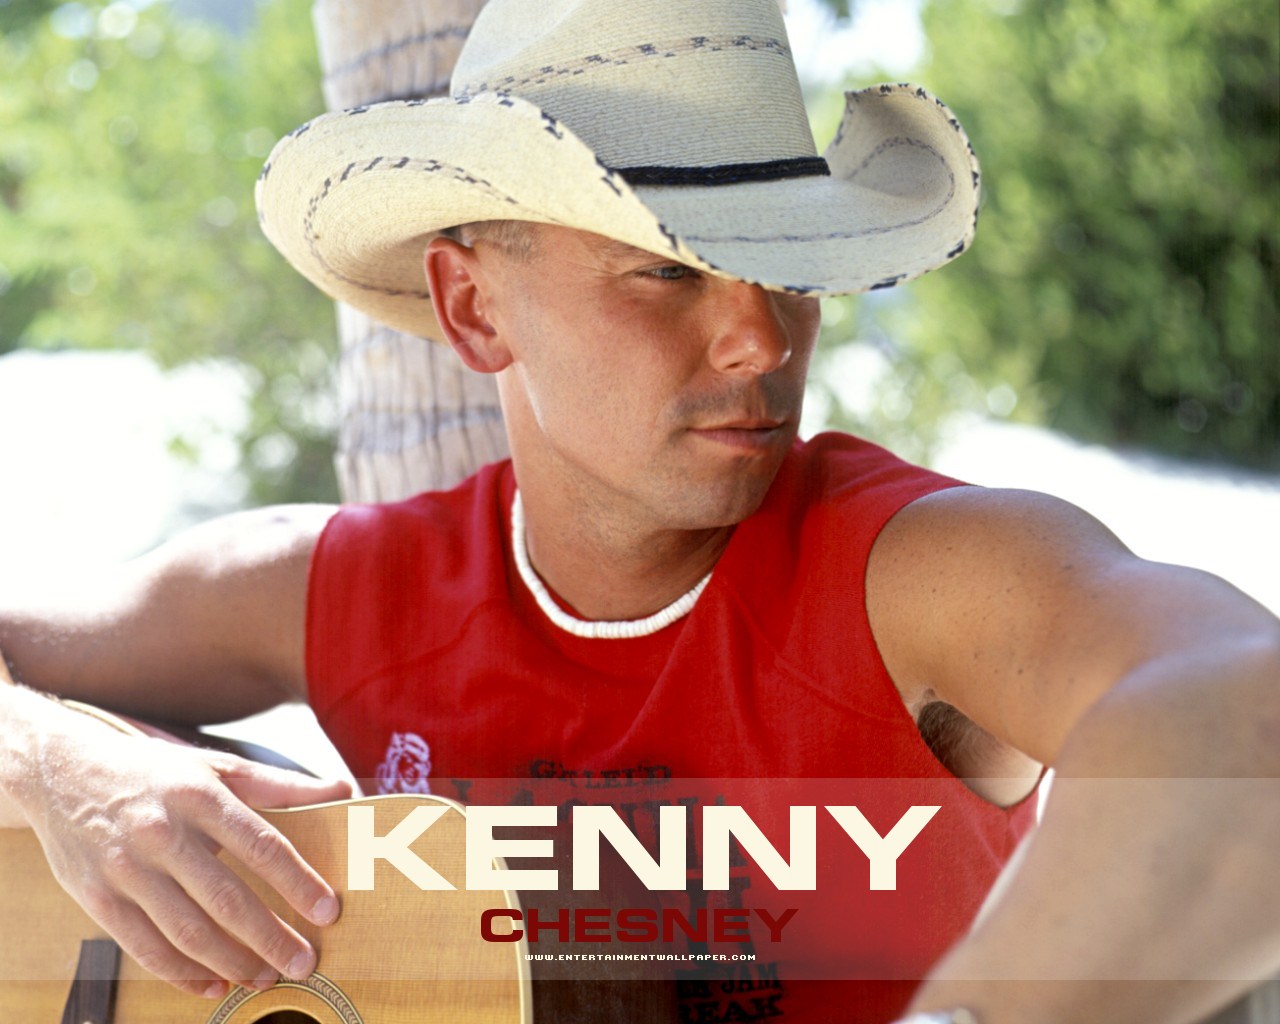 Kenny Chesney Wallpaper - Original size, download now.